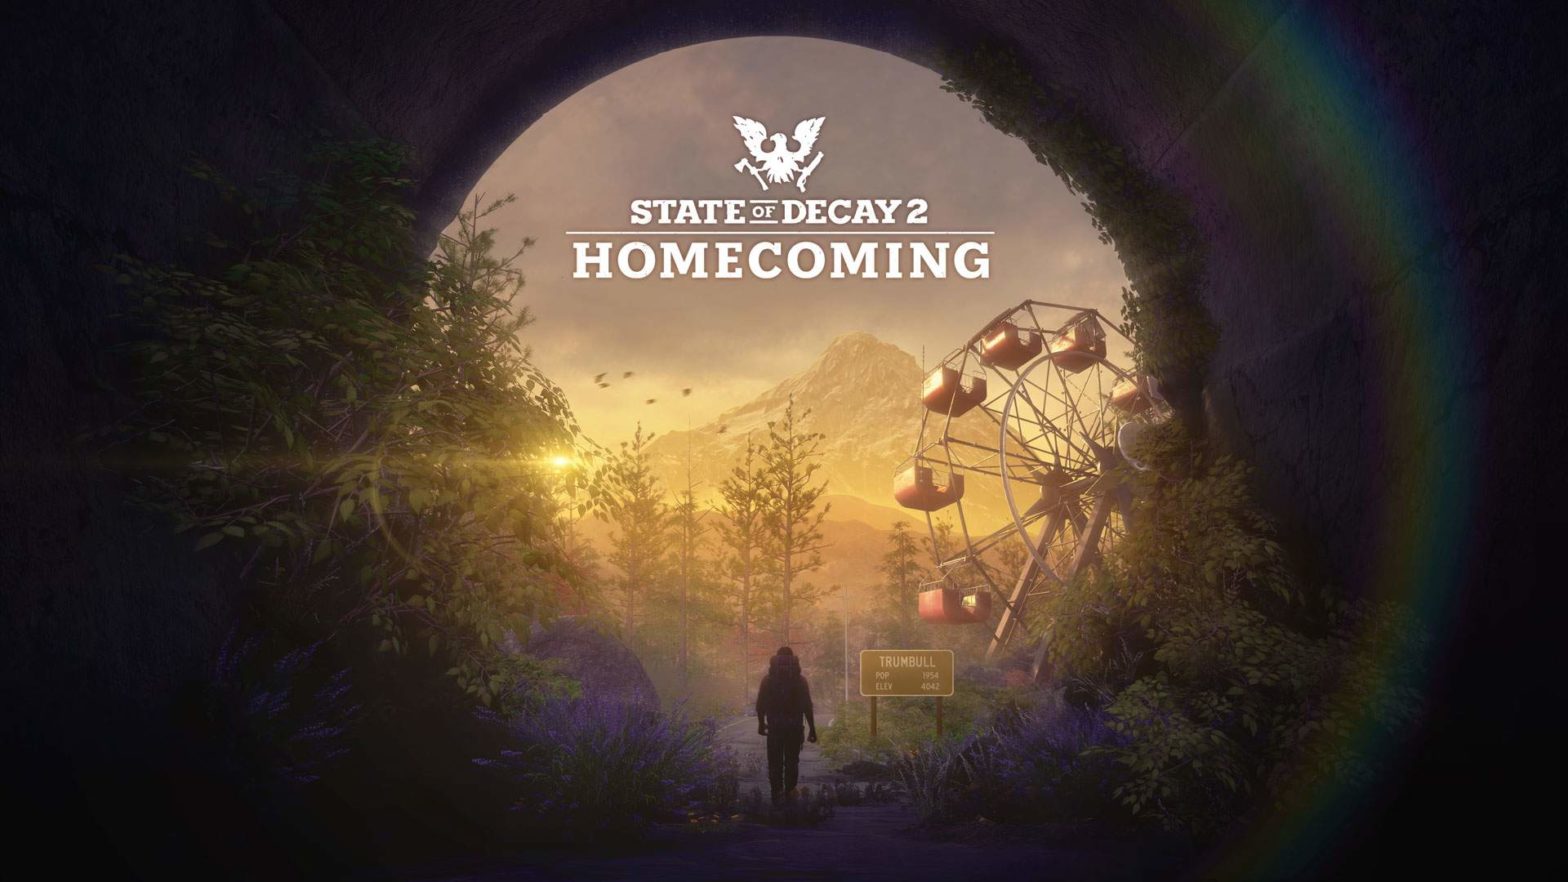 Available Now: The ‘Homecoming’ Update for State of Decay 2